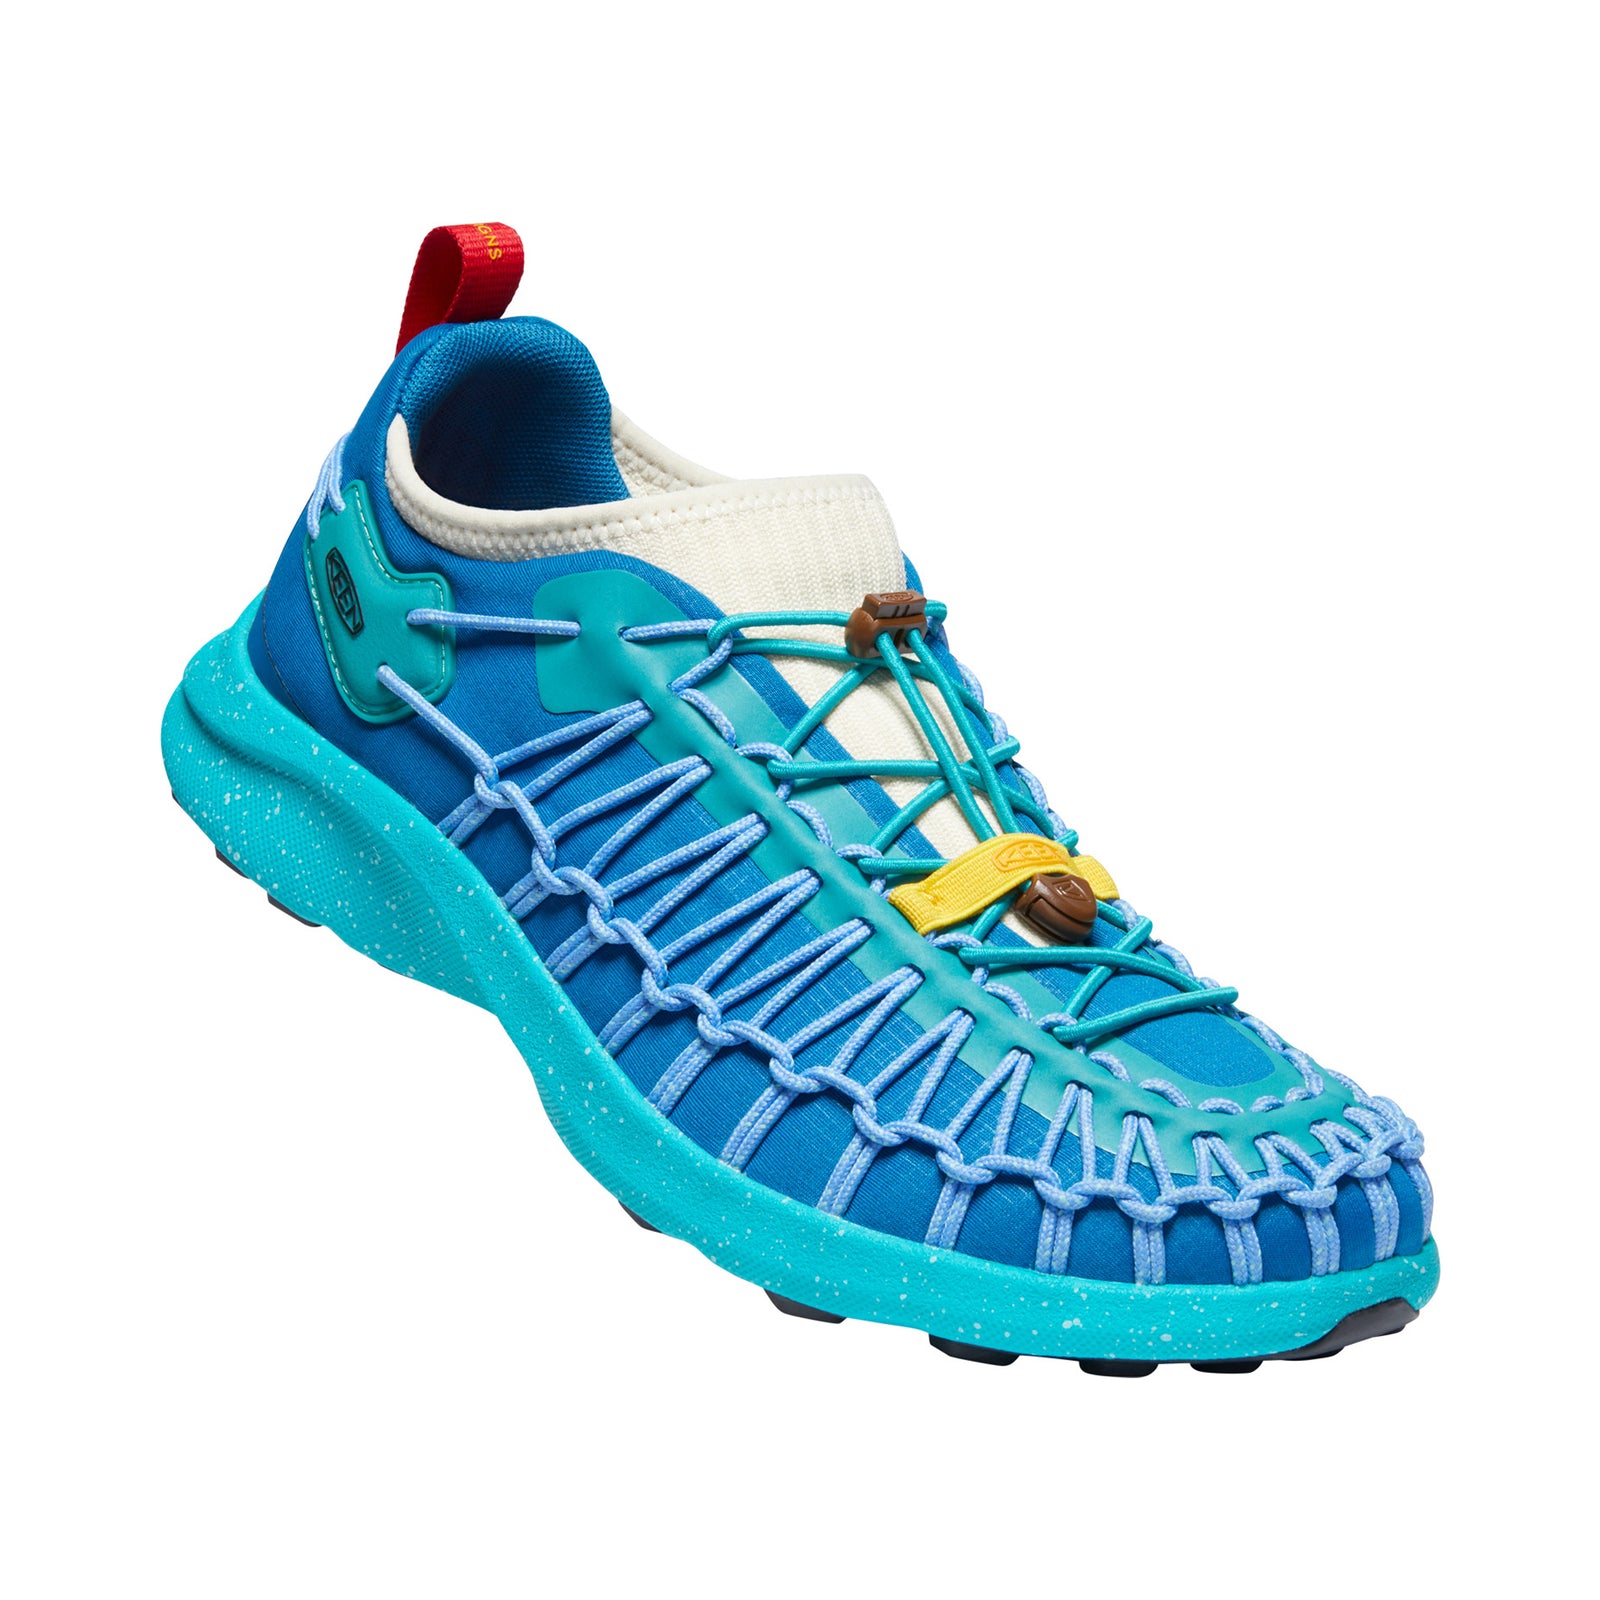 Topo Designs x Keen Men's UNEEK SNK Sneaker in Royal and Turquoise blue.